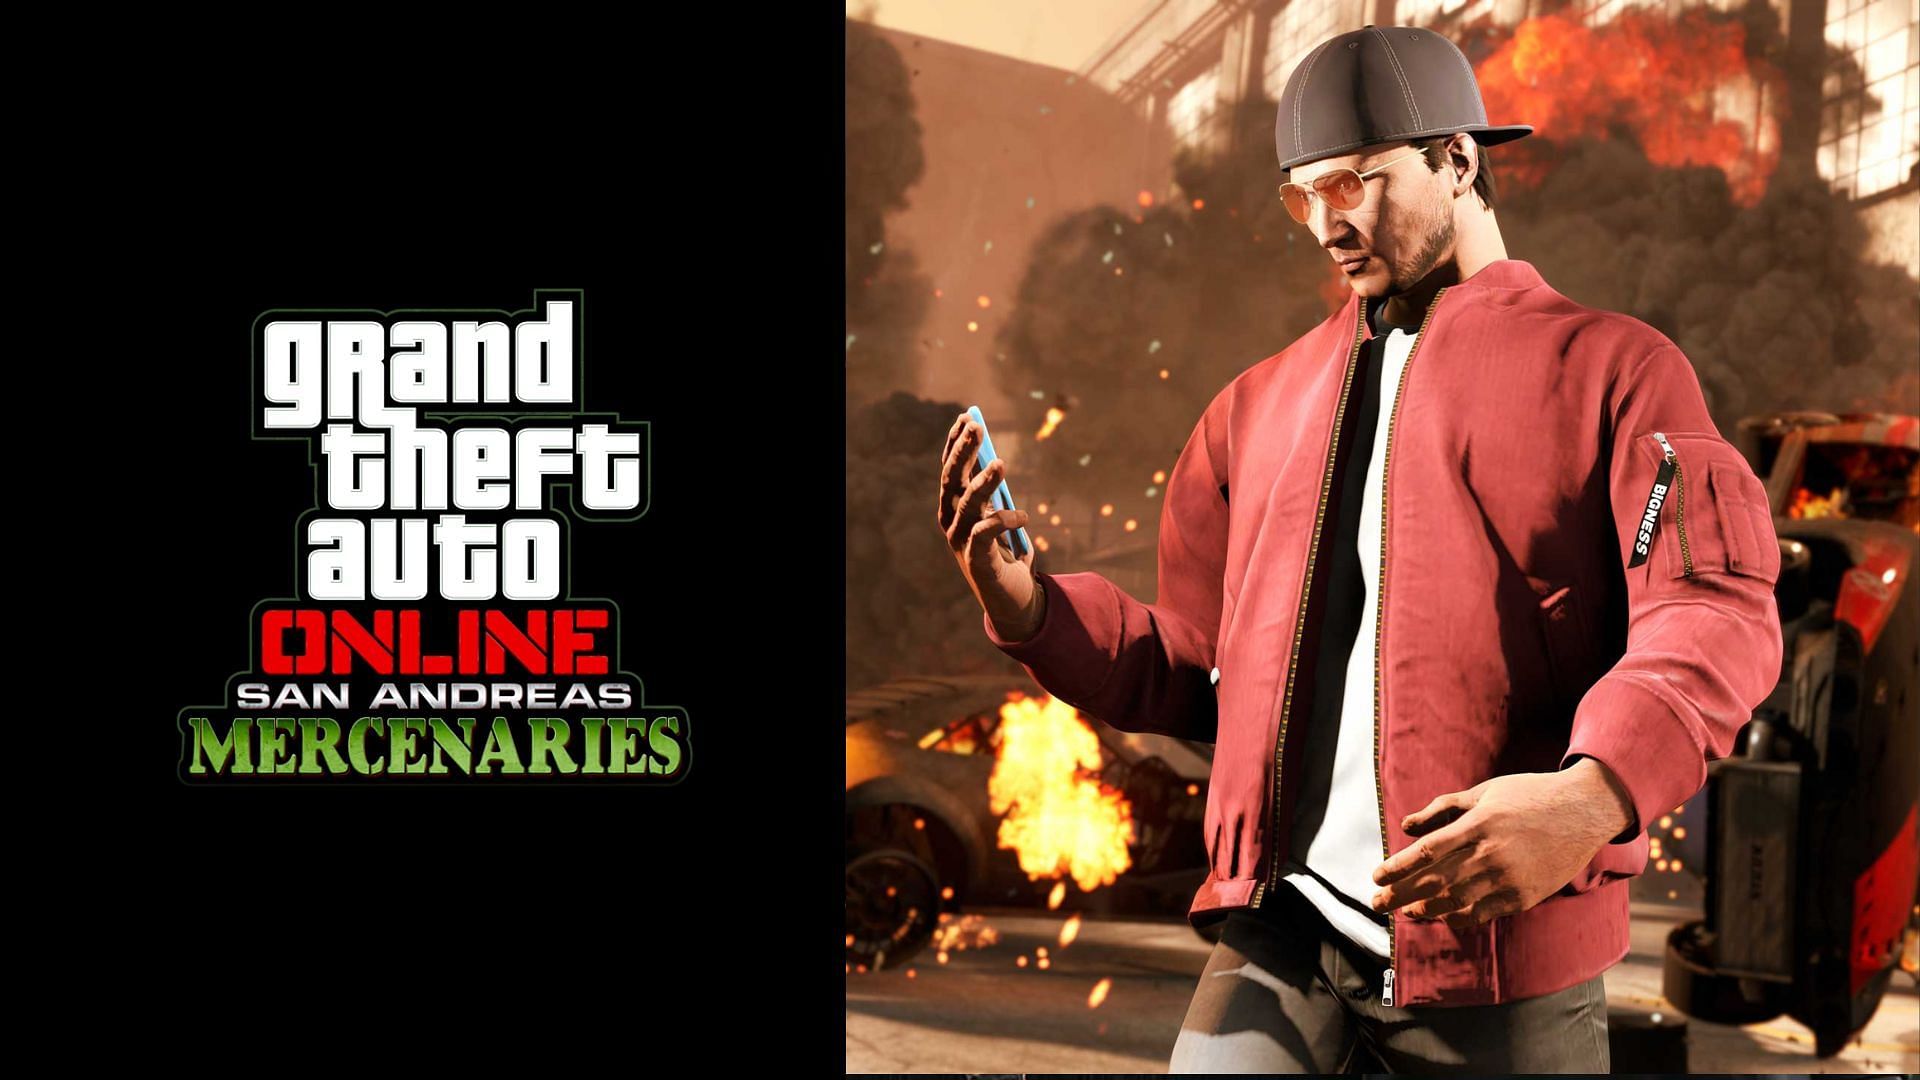 A brief about new gameplay features in GTA Online San Andreas Mercenaries DLC update as announced by Rockstar Games (Image via Rockstar Games)